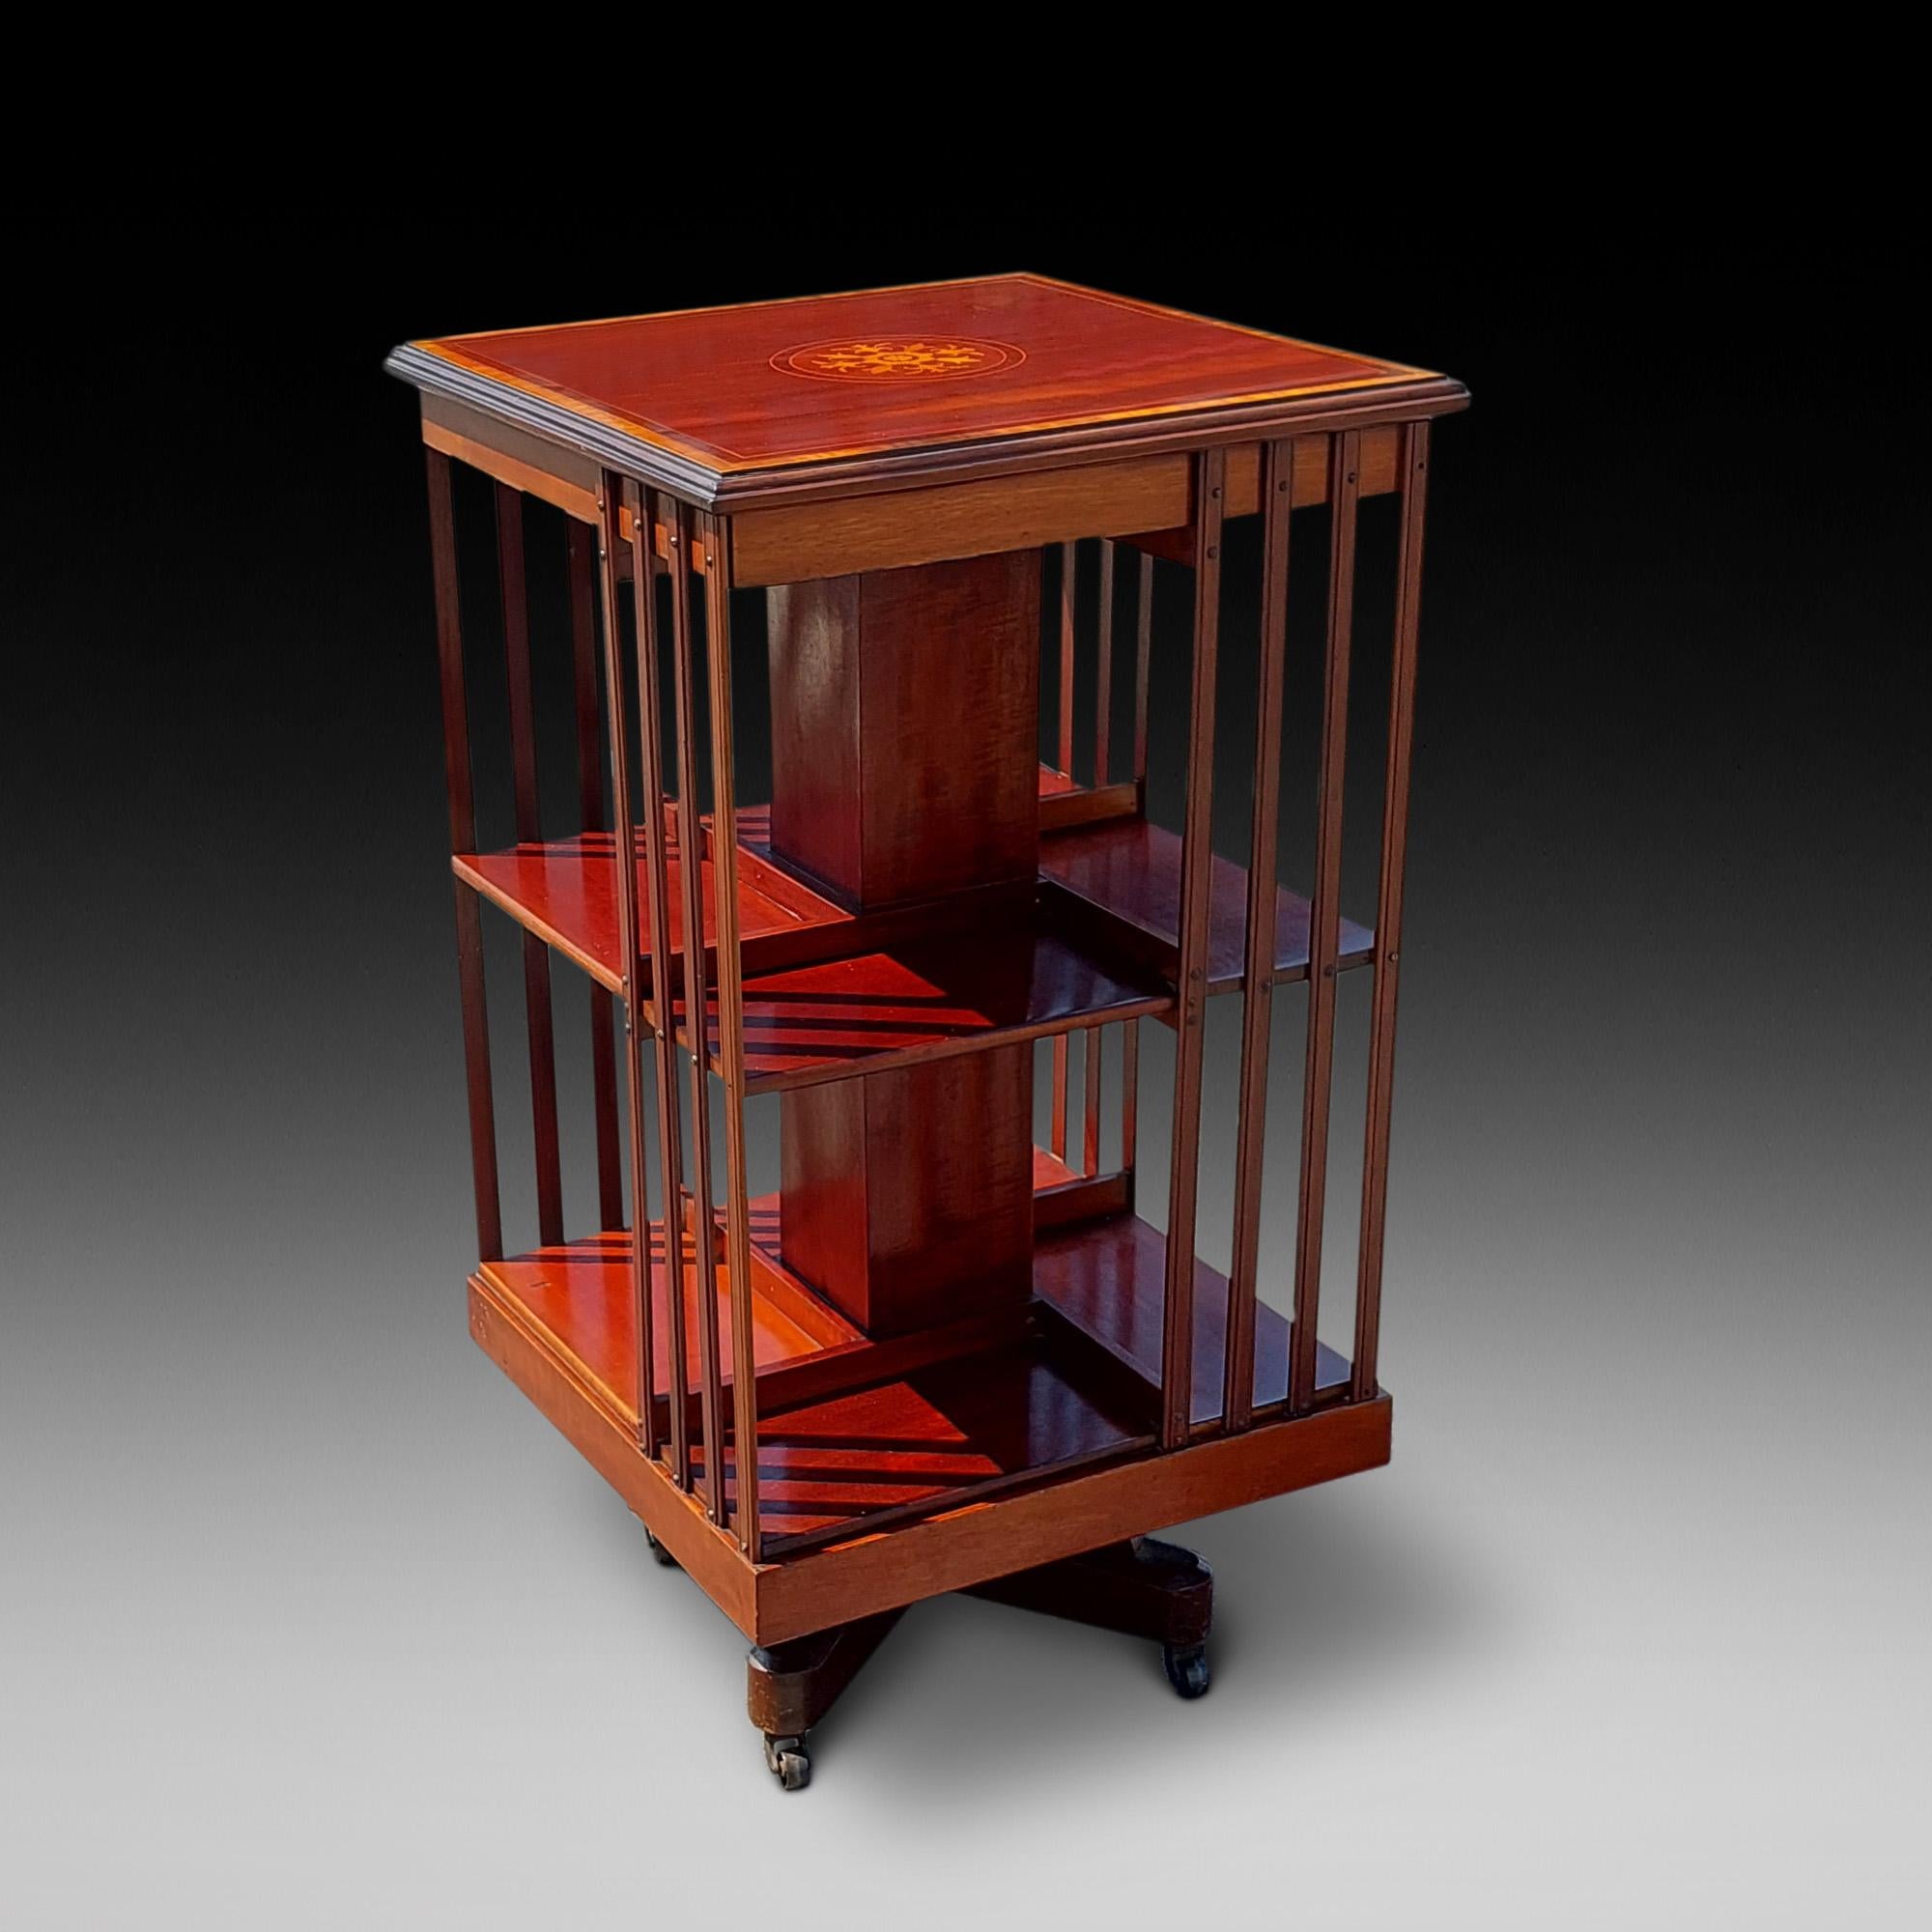 Edwardian Mahogany Inlaid Revolving Bookcase, with two tiers, rotating superstructure raised on castors. 18.5